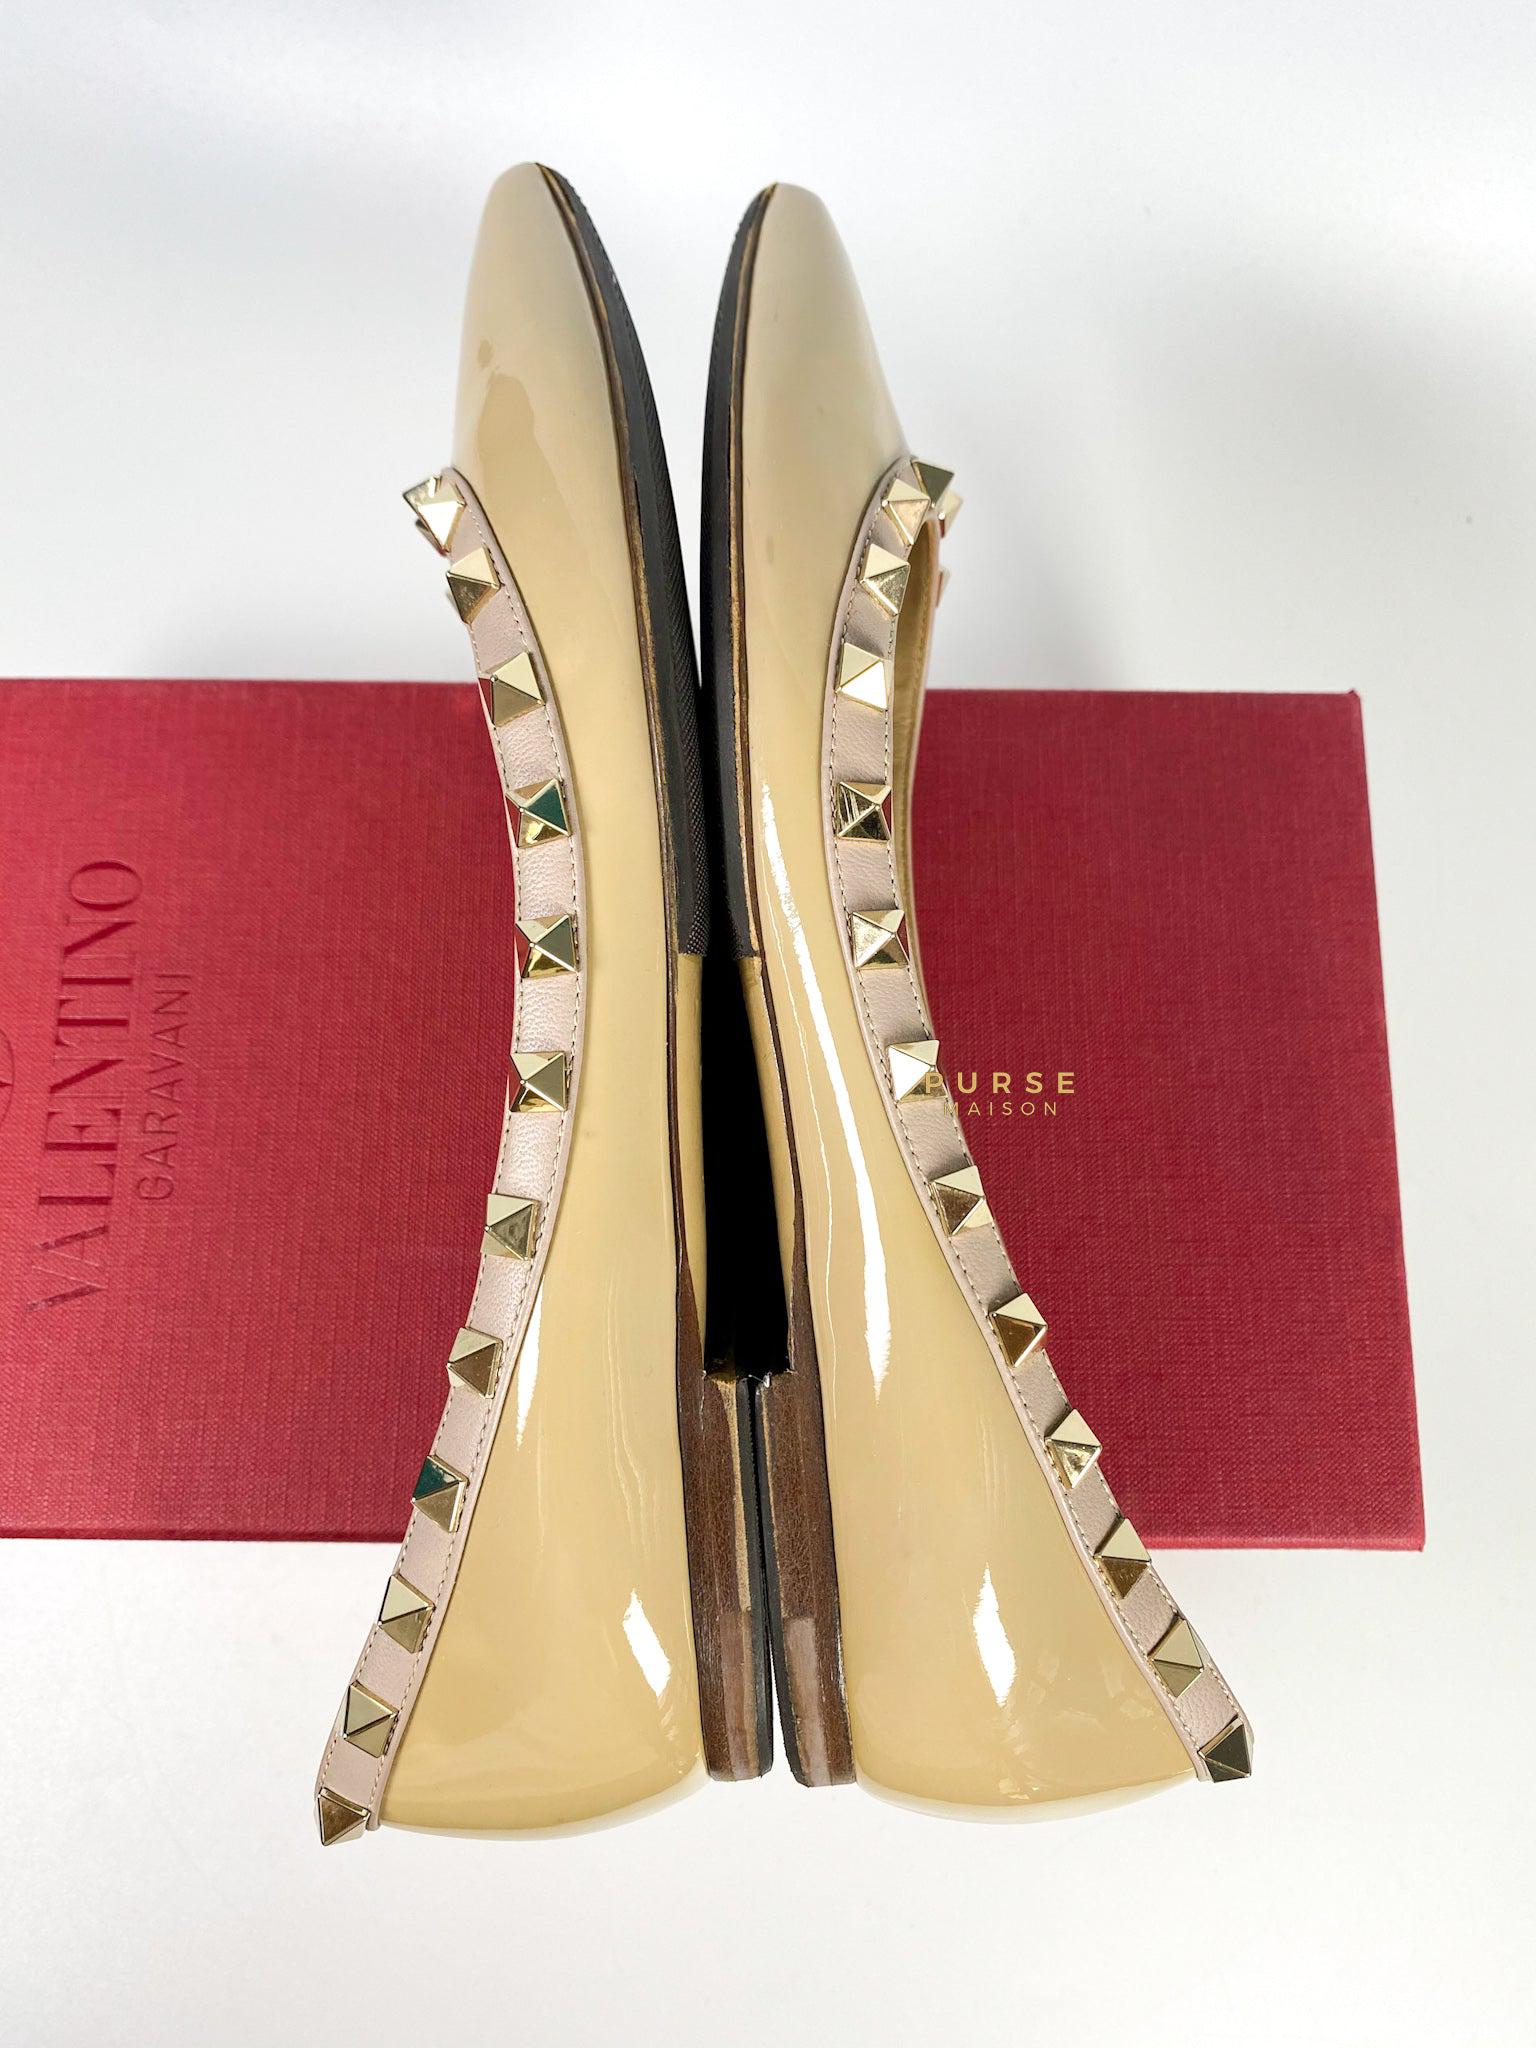 Valentino Rockstud Ballerina in Nude Patent Leather Shoes (Size 37.5 EUR, 25cm)